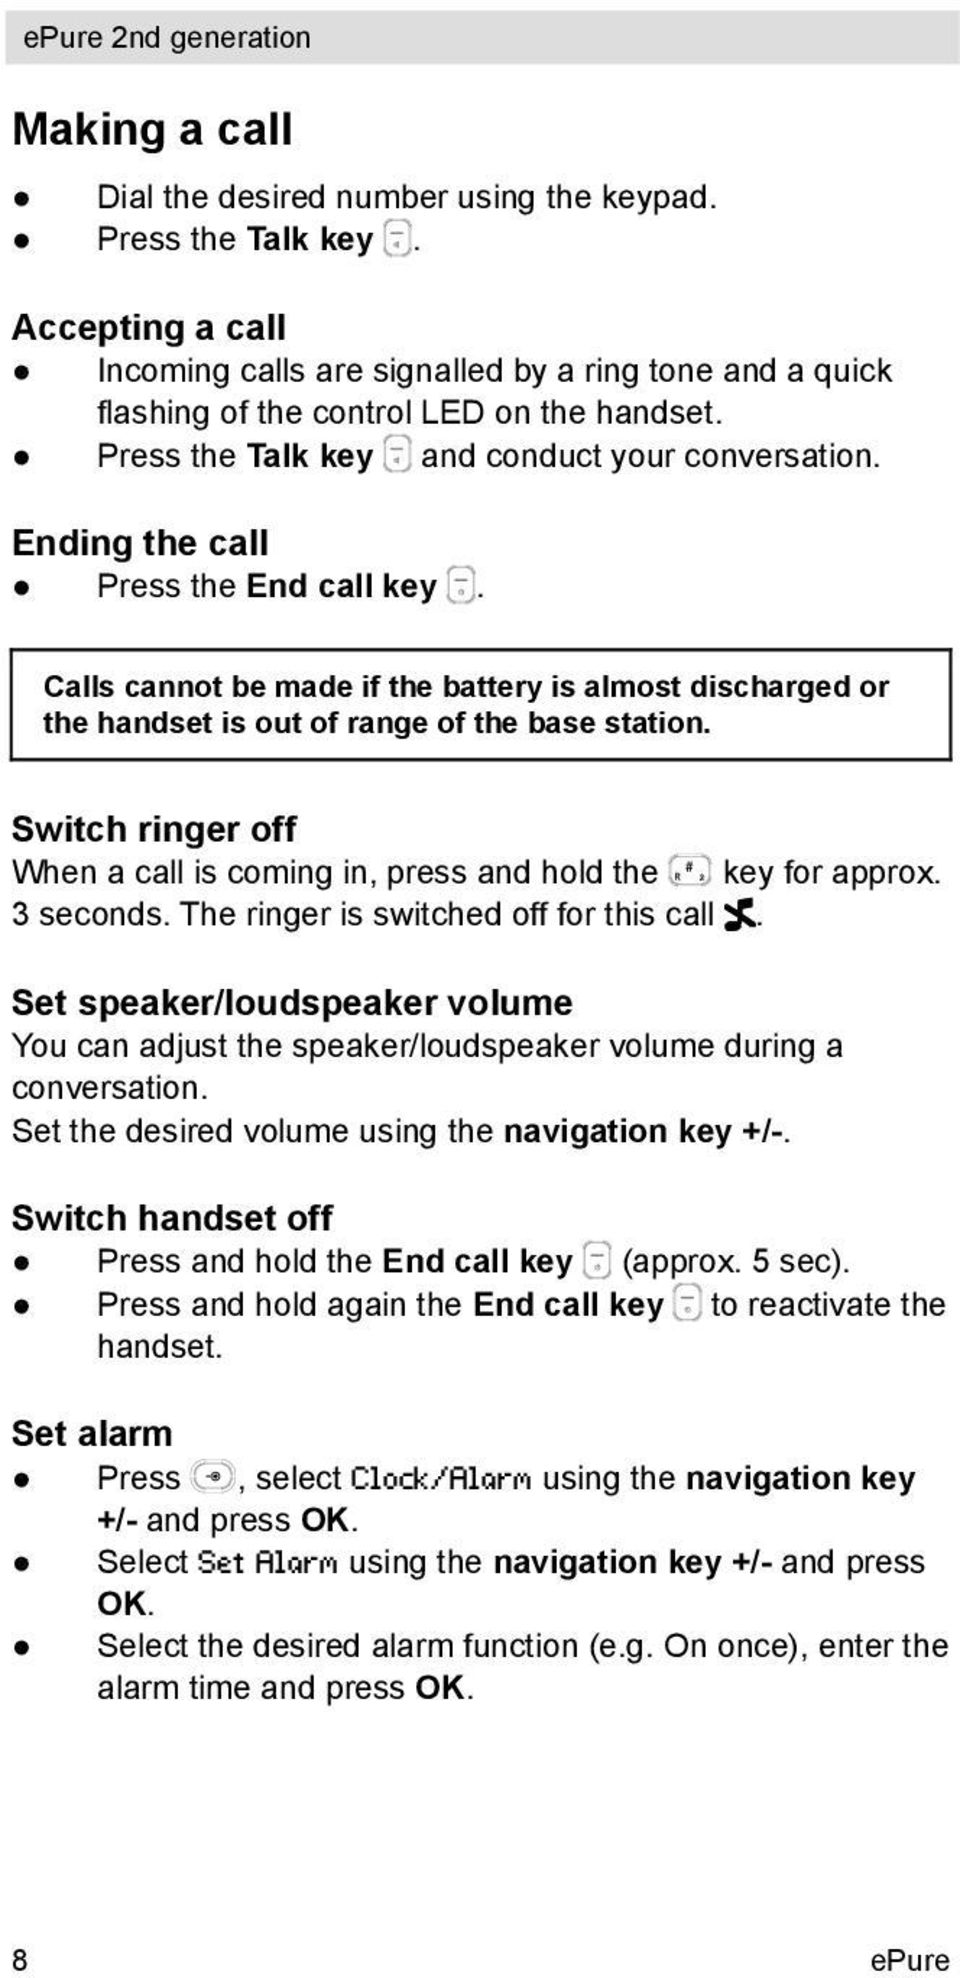 Switch ringer off When a call is coming in, press and hold the key for approx. 3 seconds. The ringer is switched off for this call.